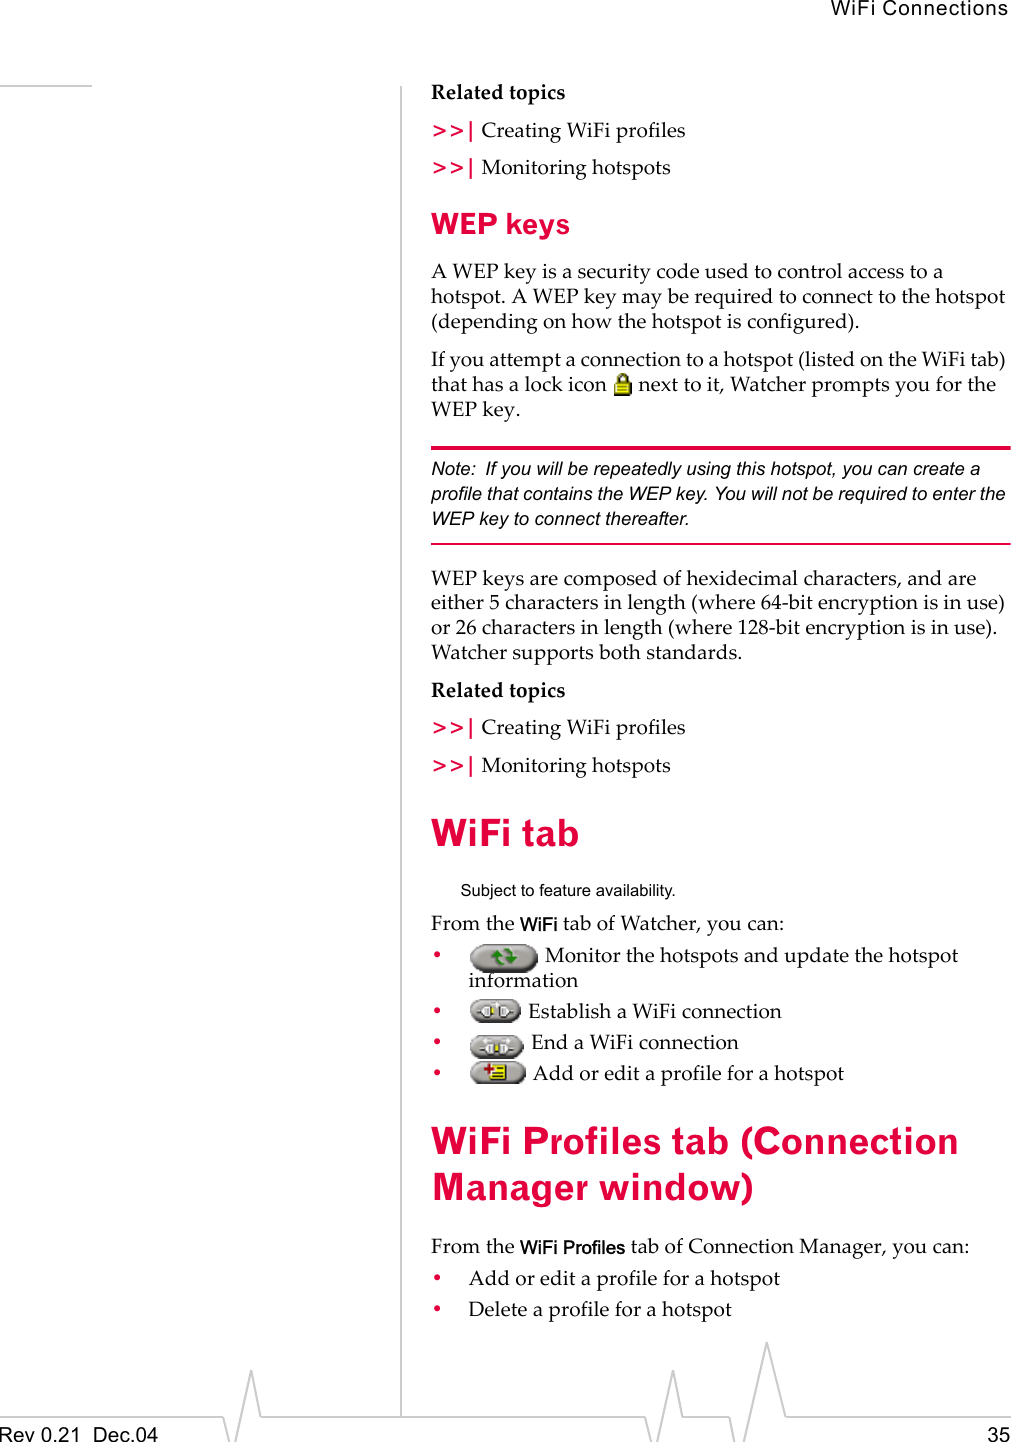 WiFi ConnectionsRev 0.21  Dec.04 35Related topics&gt;&gt;| Creating WiFi profiles&gt;&gt;| Monitoring hotspotsWEP keysA WEP key is a security code used to control access to a hotspot. A WEP key may be required to connect to the hotspot (depending on how the hotspot is configured).If you attempt a connection to a hotspot (listed on the WiFi tab) that has a lock icon   next to it, Watcher prompts you for the WEP key.Note: If you will be repeatedly using this hotspot, you can create a profile that contains the WEP key. You will not be required to enter the WEP key to connect thereafter.WEP keys are composed of hexidecimal characters, and are either 5 characters in length (where 64-bit encryption is in use) or 26 characters in length (where 128-bit encryption is in use). Watcher supports both standards.Related topics&gt;&gt;| Creating WiFi profiles&gt;&gt;| Monitoring hotspotsWiFi tabSubject to feature availability.From the WiFi tab of Watcher, you can:• Monitor the hotspots and update the hotspot information• Establish a WiFi connection• End a WiFi connection• Add or edit a profile for a hotspotWiFi Profiles tab (Connection Manager window)From the WiFi Profiles tab of Connection Manager, you can:•Add or edit a profile for a hotspot•Delete a profile for a hotspot